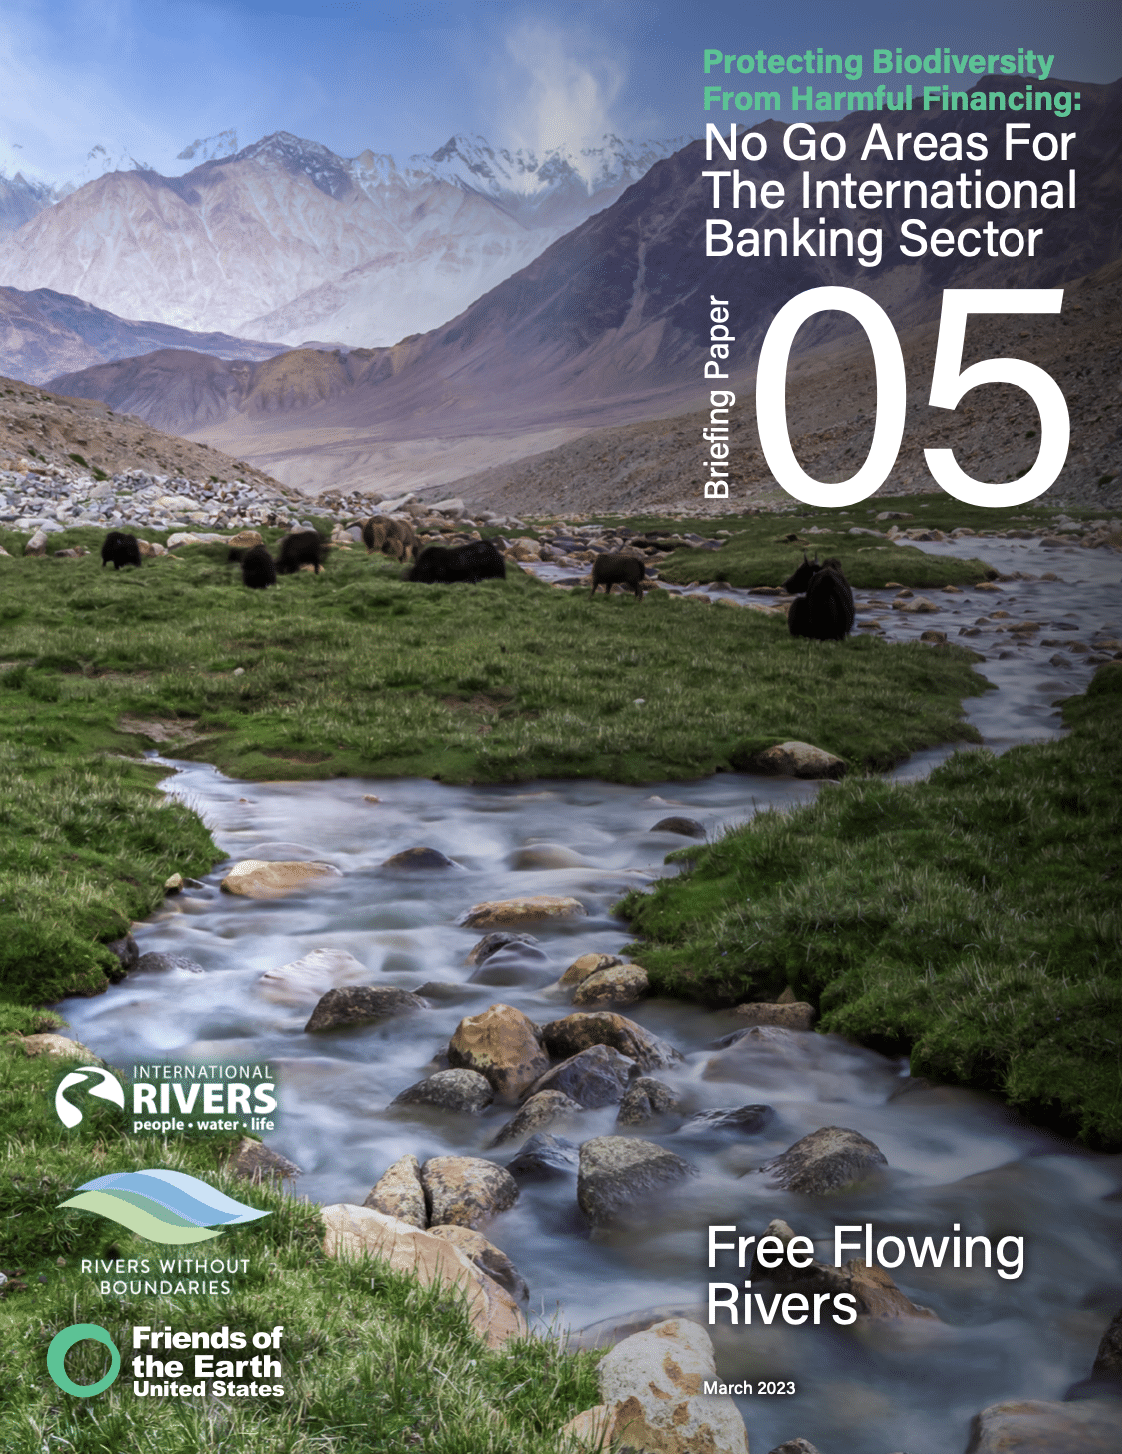 On World Water Day, new briefing paper calls on banks and financiers to prohibit harmful financing to free flowing rivers